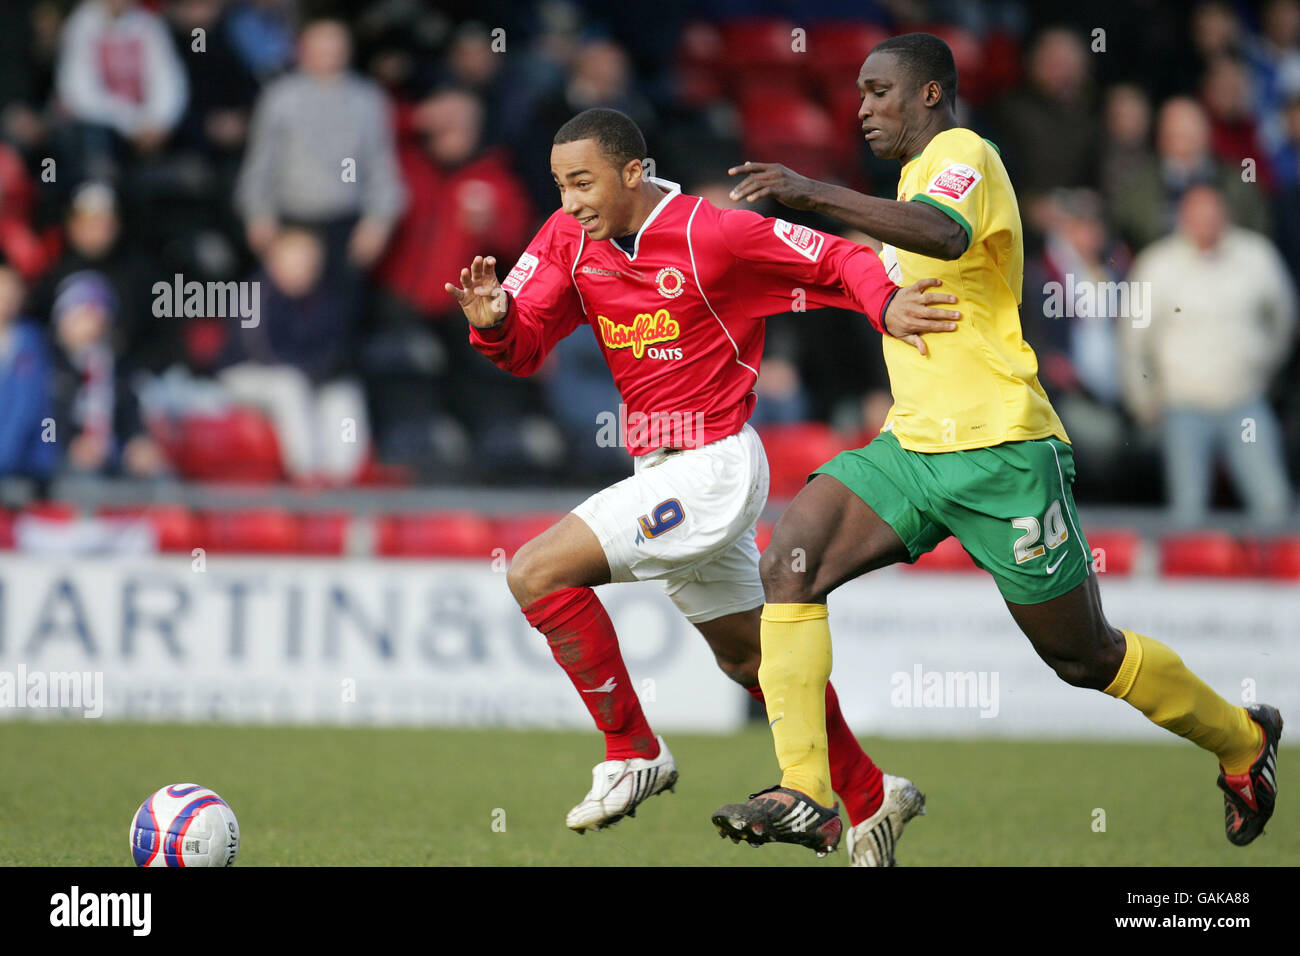 Hartlepool's Godwin Antwi (right) battles for the ball with Crewe's Nicky Maynard during the Coca-Cola League One match at Gresty Road, Crewe. Stock Photo